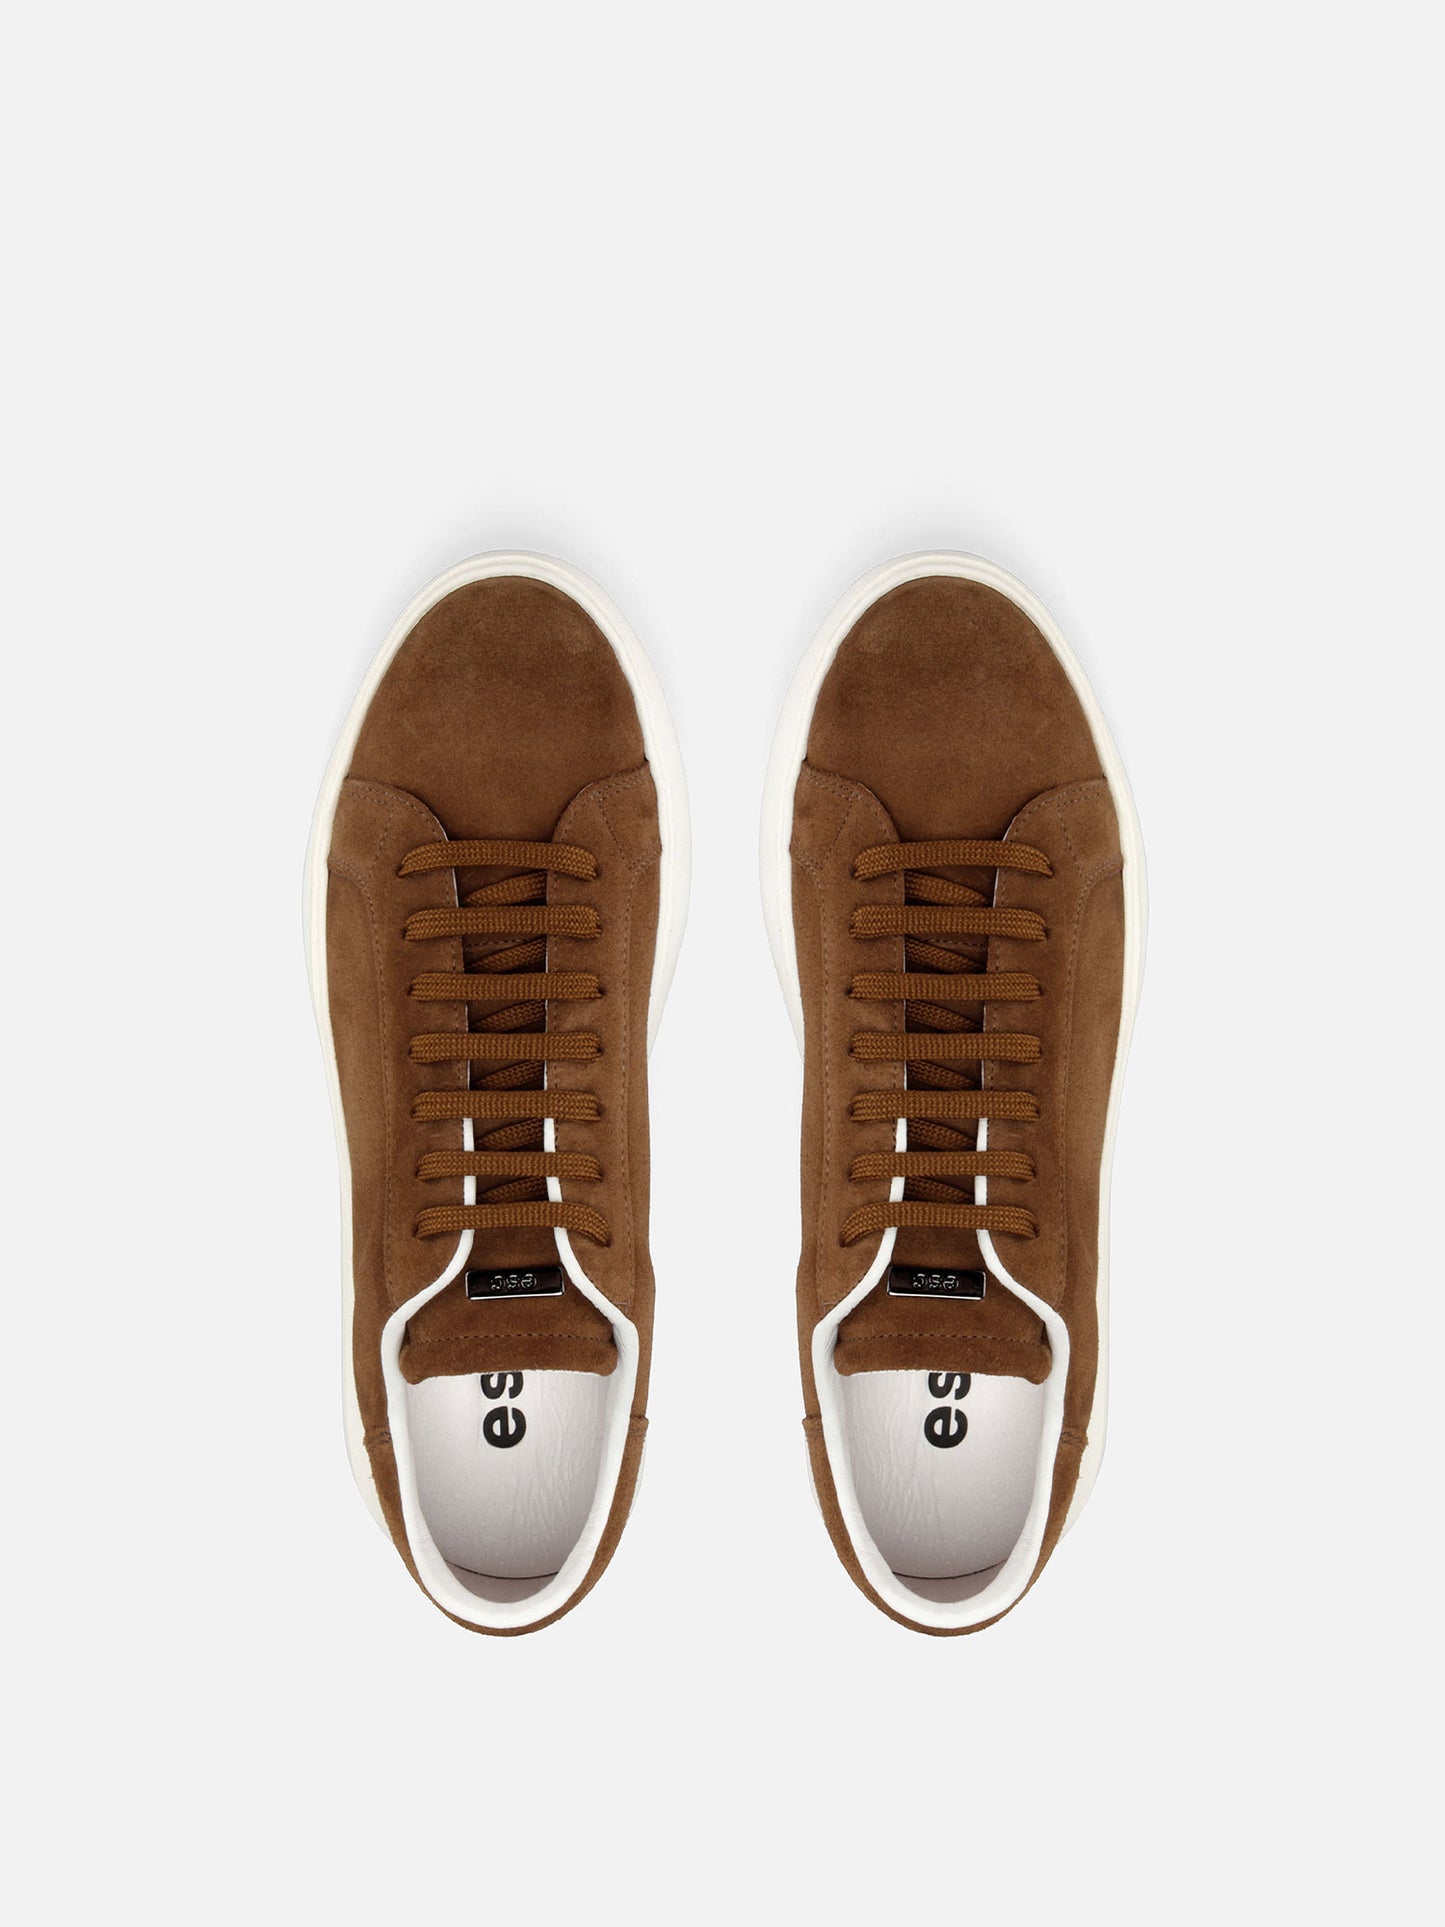 BOT Leather Sneakers - Cognac